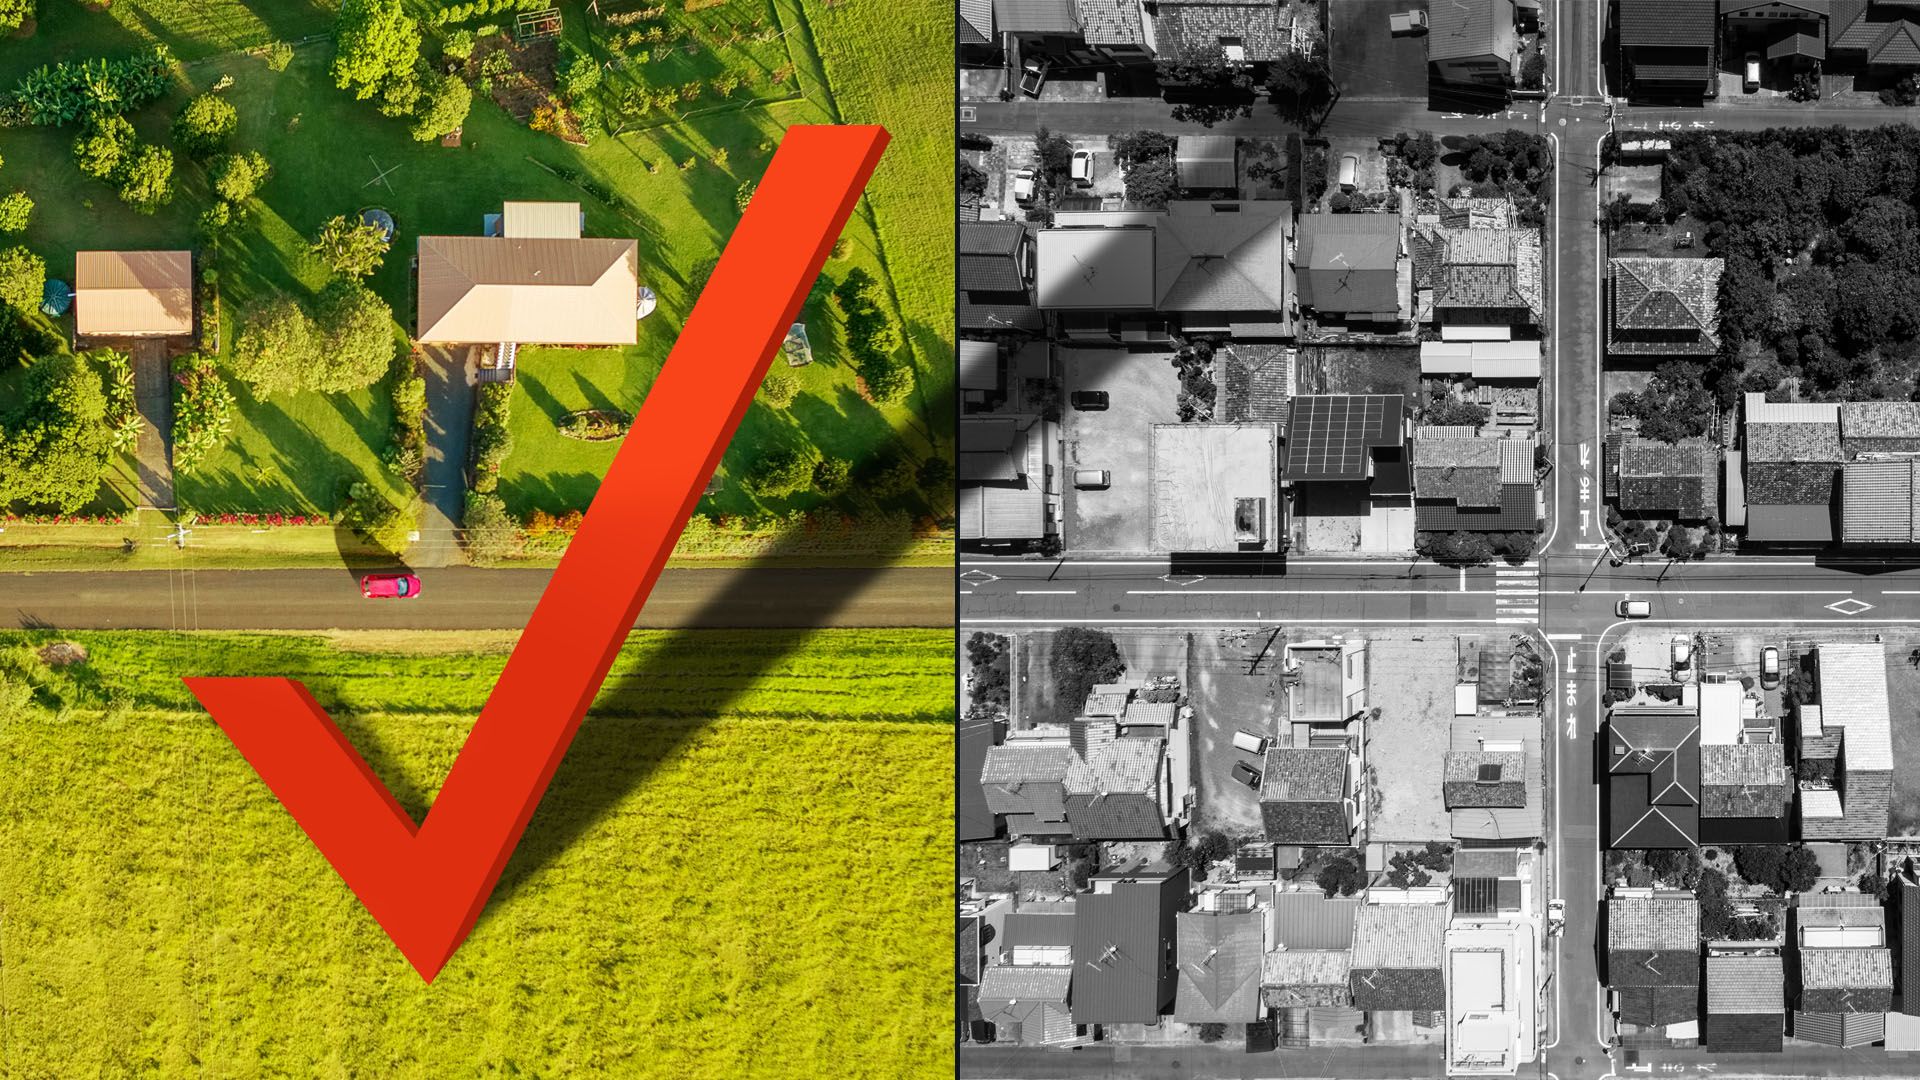 Illustration of a rural area in color with a giant check mark casting a shadow over the black and white urban area next to it 